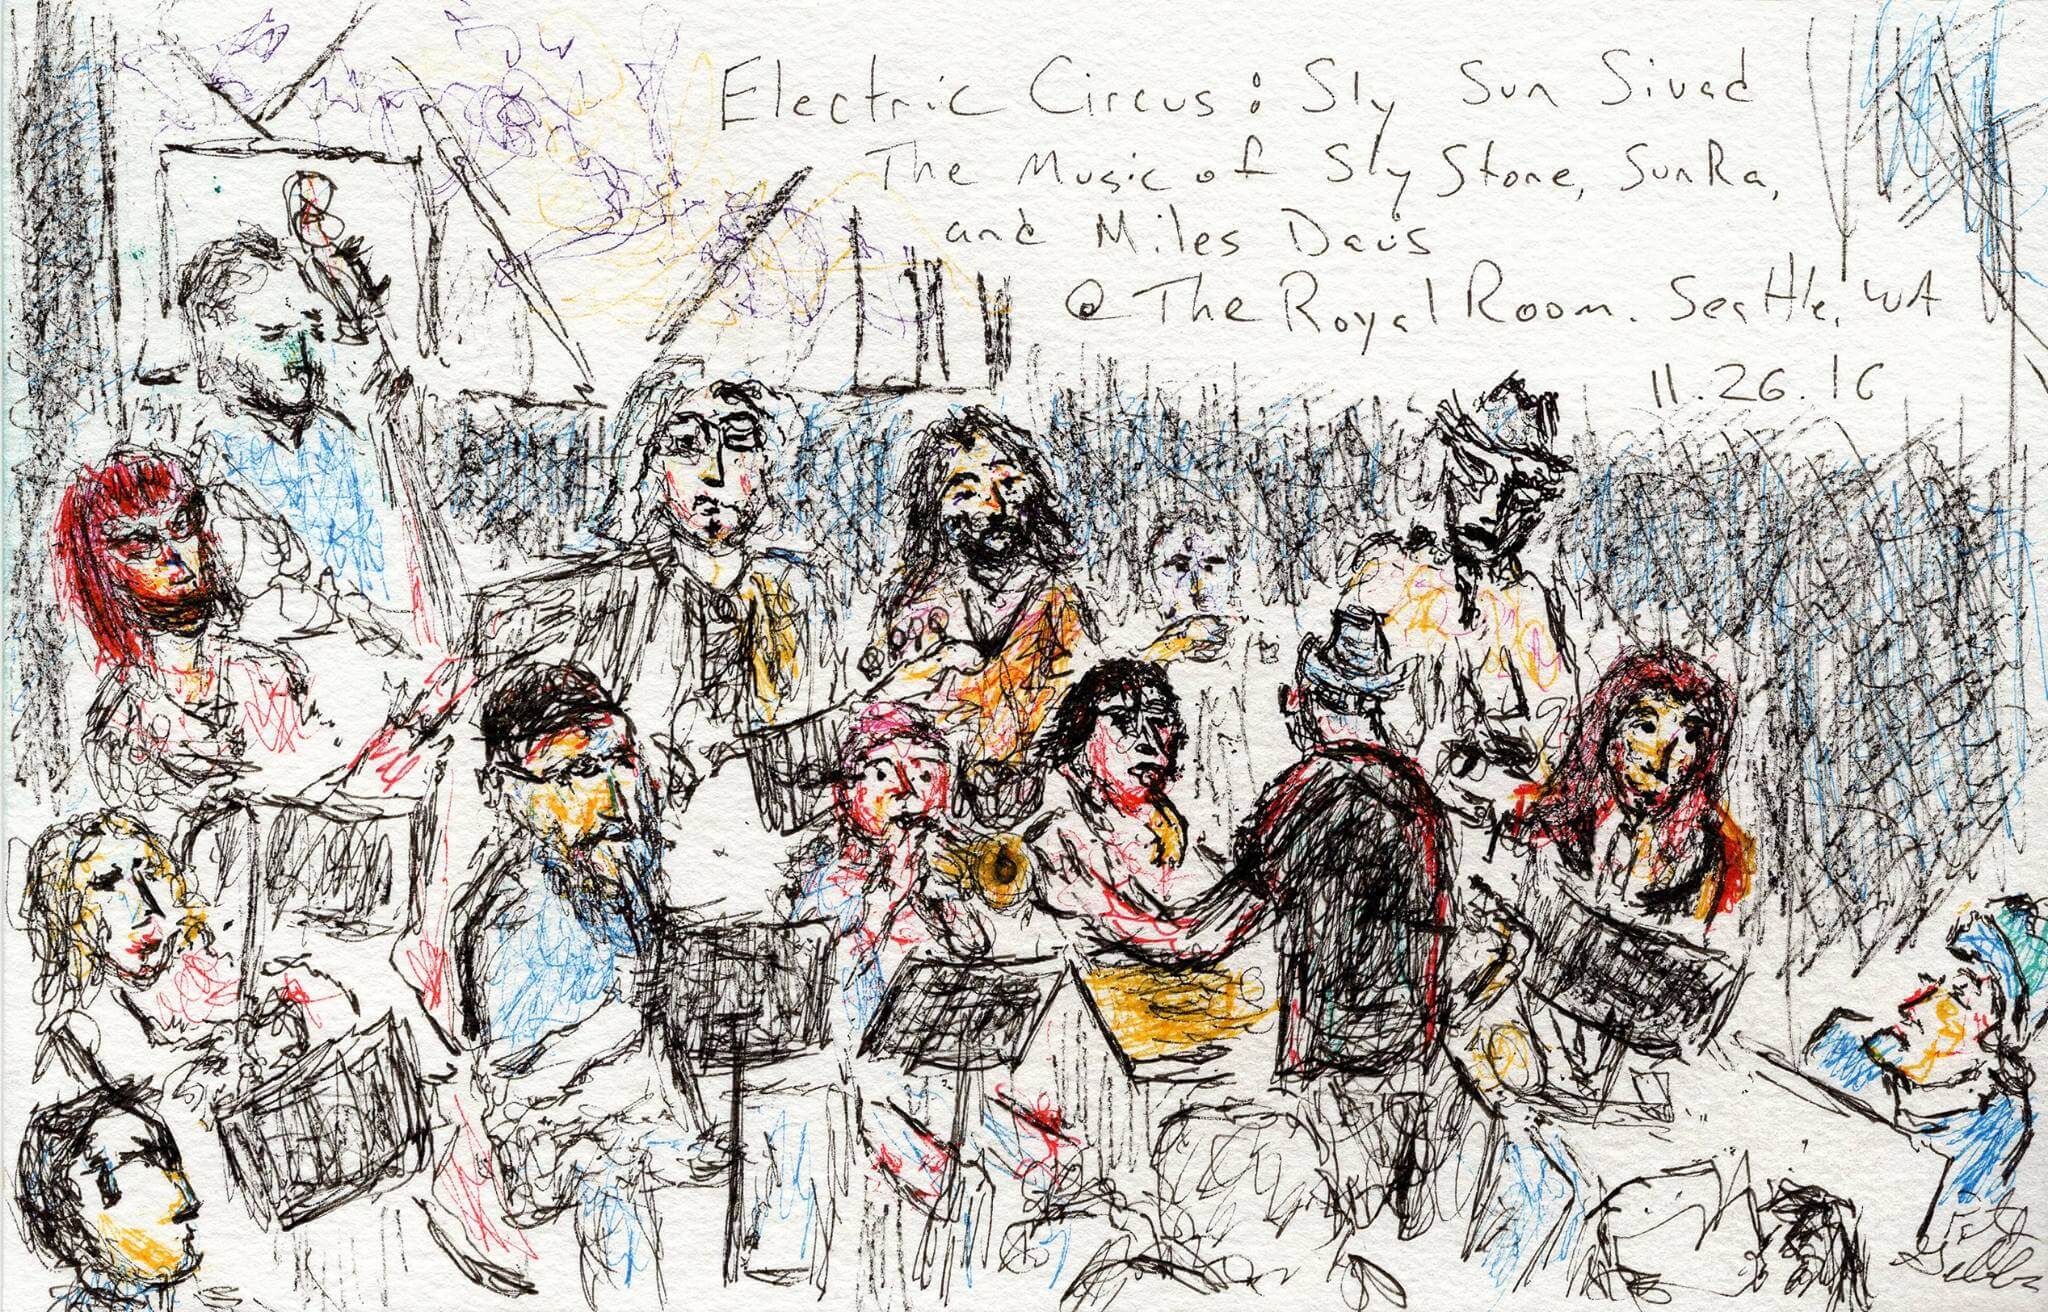 pen and ink illustration by Patrick Gibbs of Seattle musicians performing in the band Electric Circus at the Royal Room